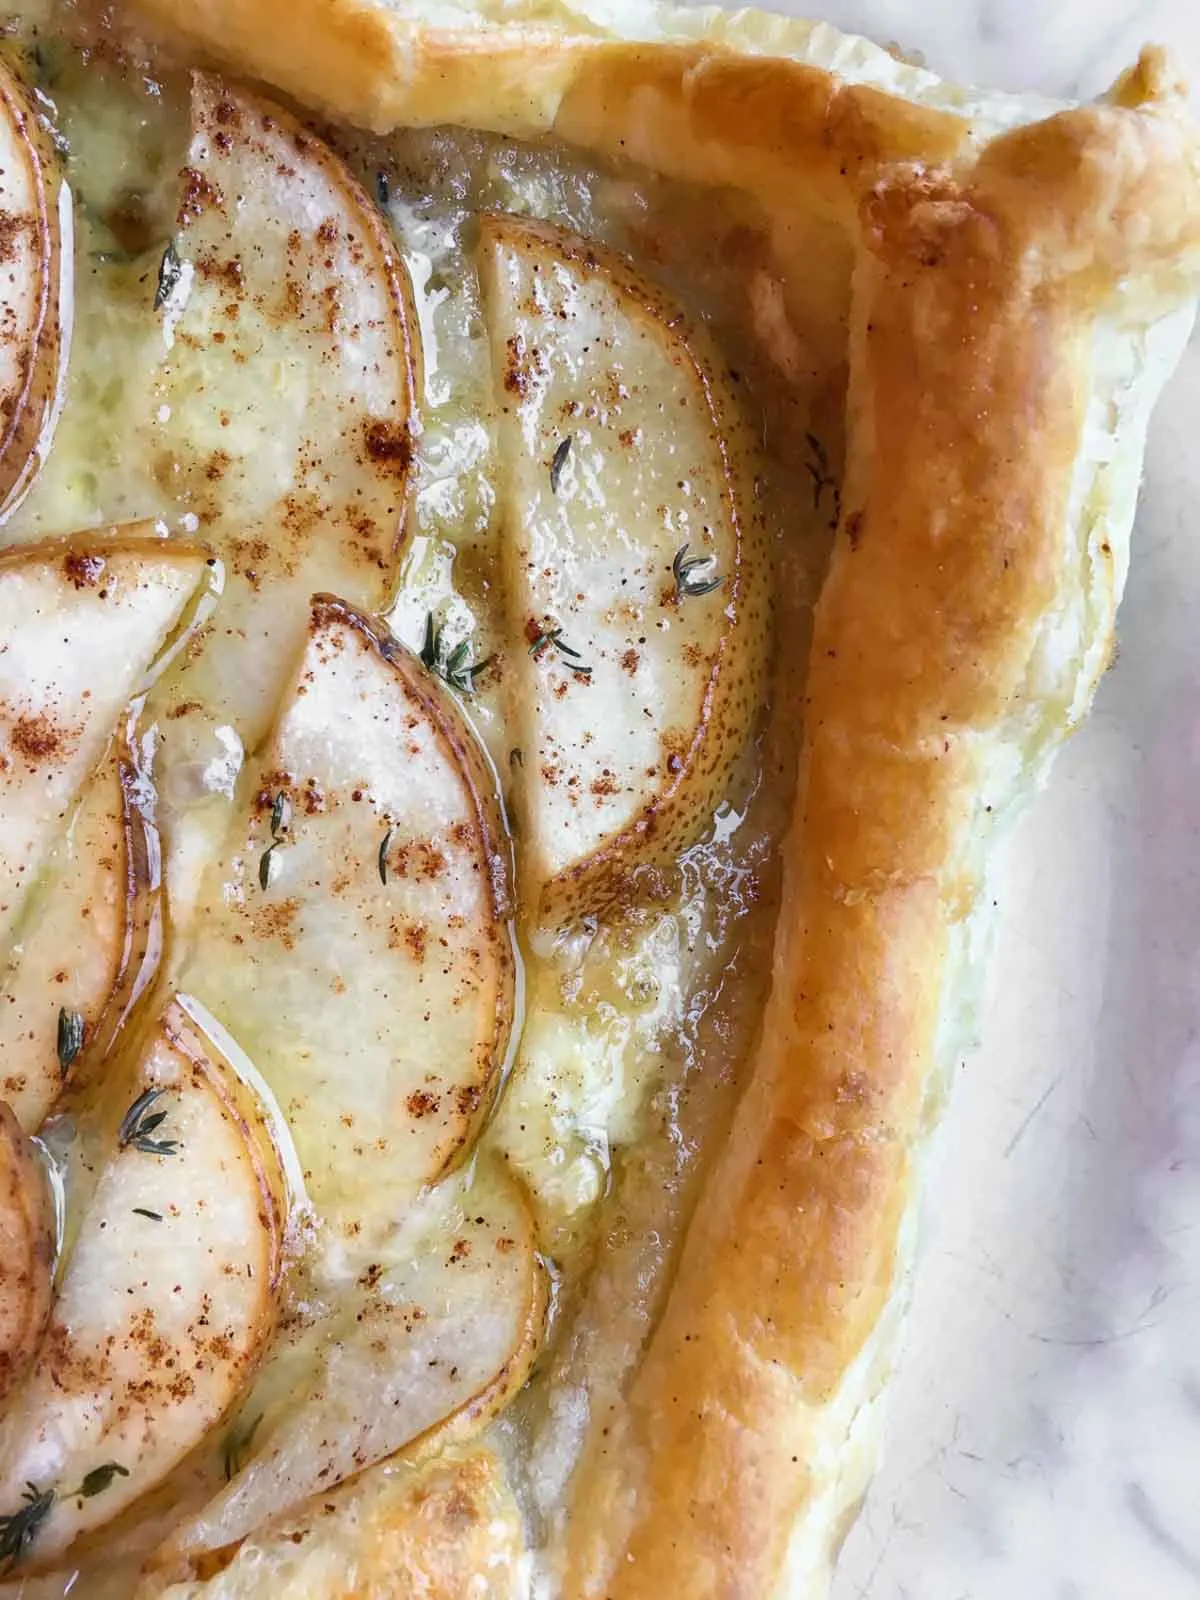 Sliced pears on puff pastry appetizer